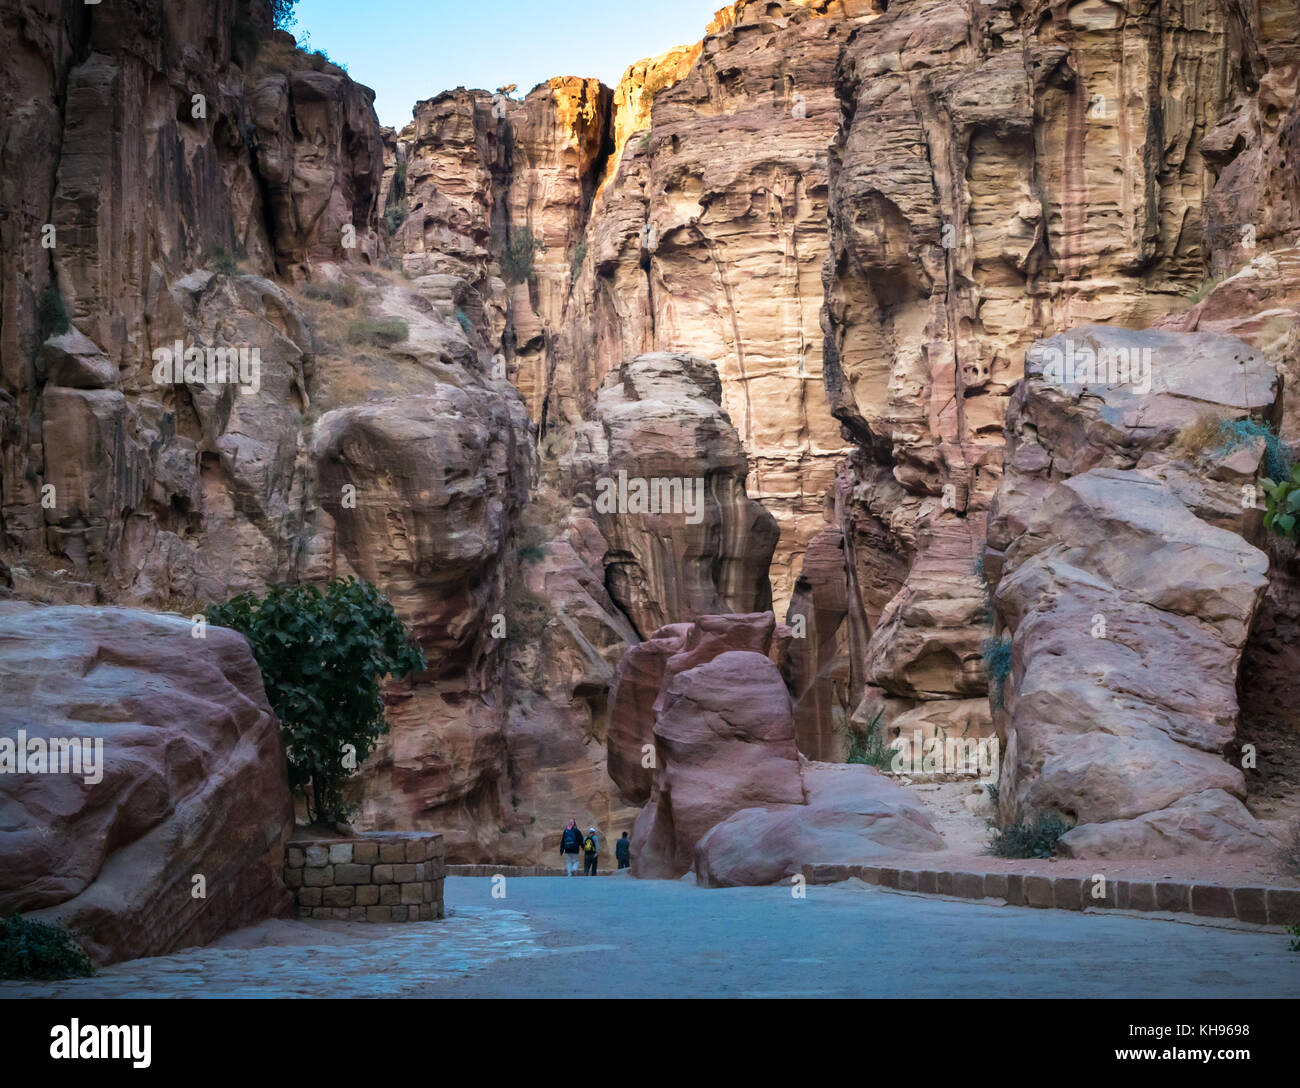 Tourist visitors walking through empty Siq pink sandstone gorge in early morning light, Petra, Jordan, Middle East Stock Photo